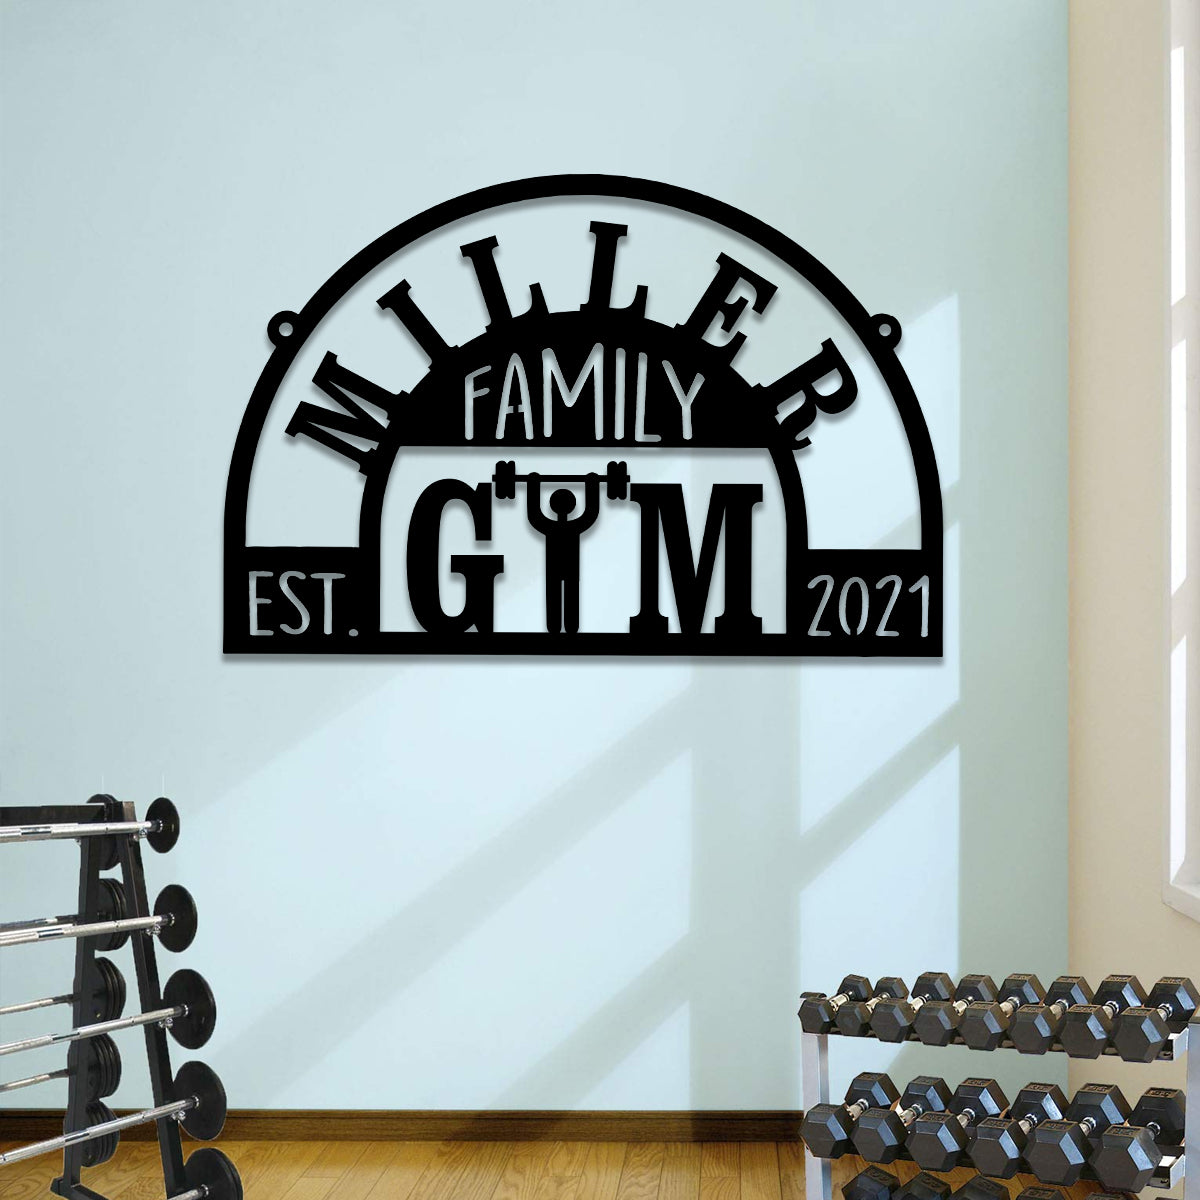 Personalized Metal Gym Sign, Cross Fit Club, Home Wall Decor, Wedding Art Gift